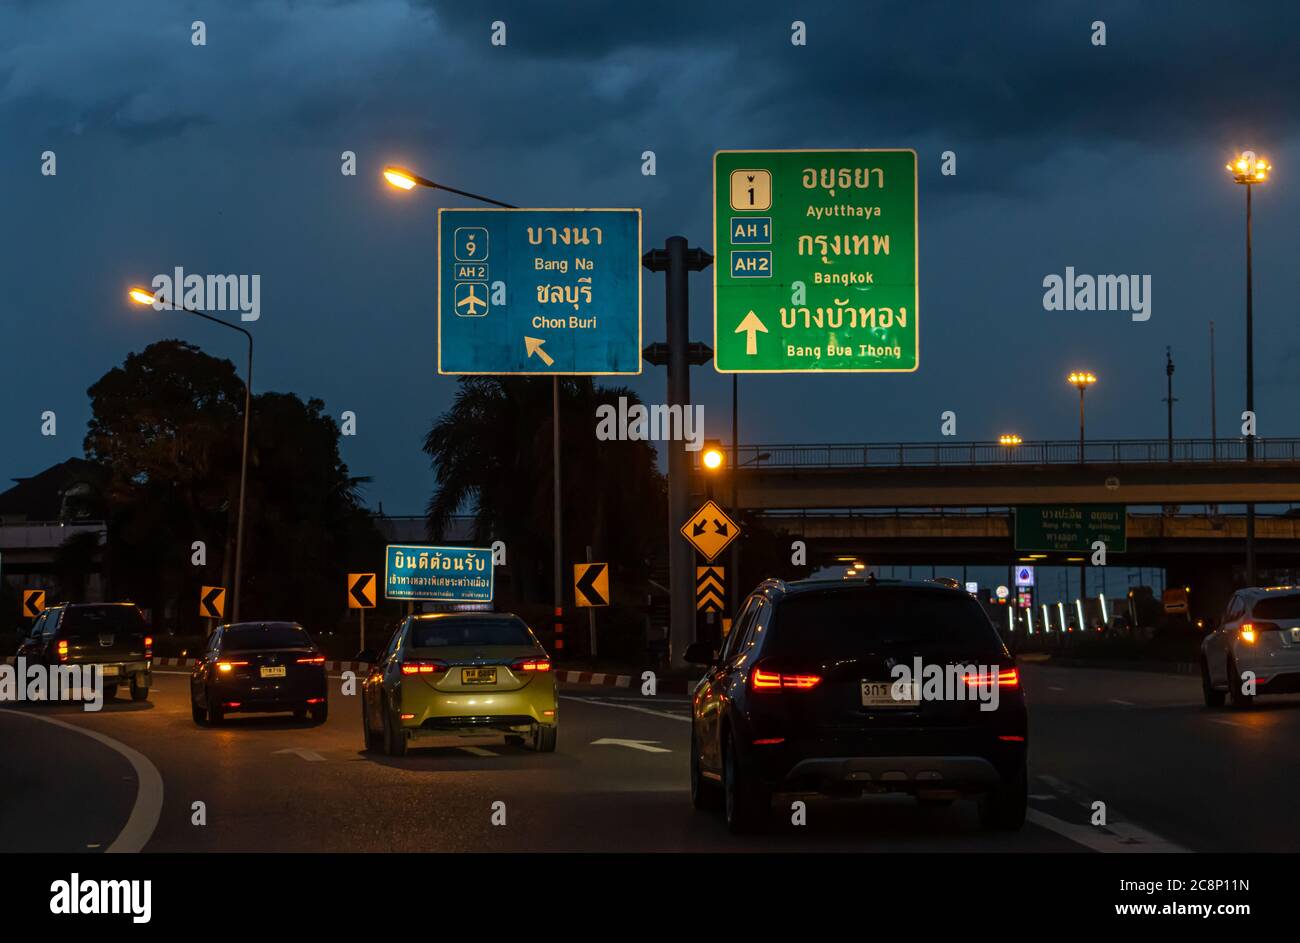 THAILAND, JUN 03 2020, The cars go to the turnoff from the highway. Evening traffic on the motorway. Stock Photo